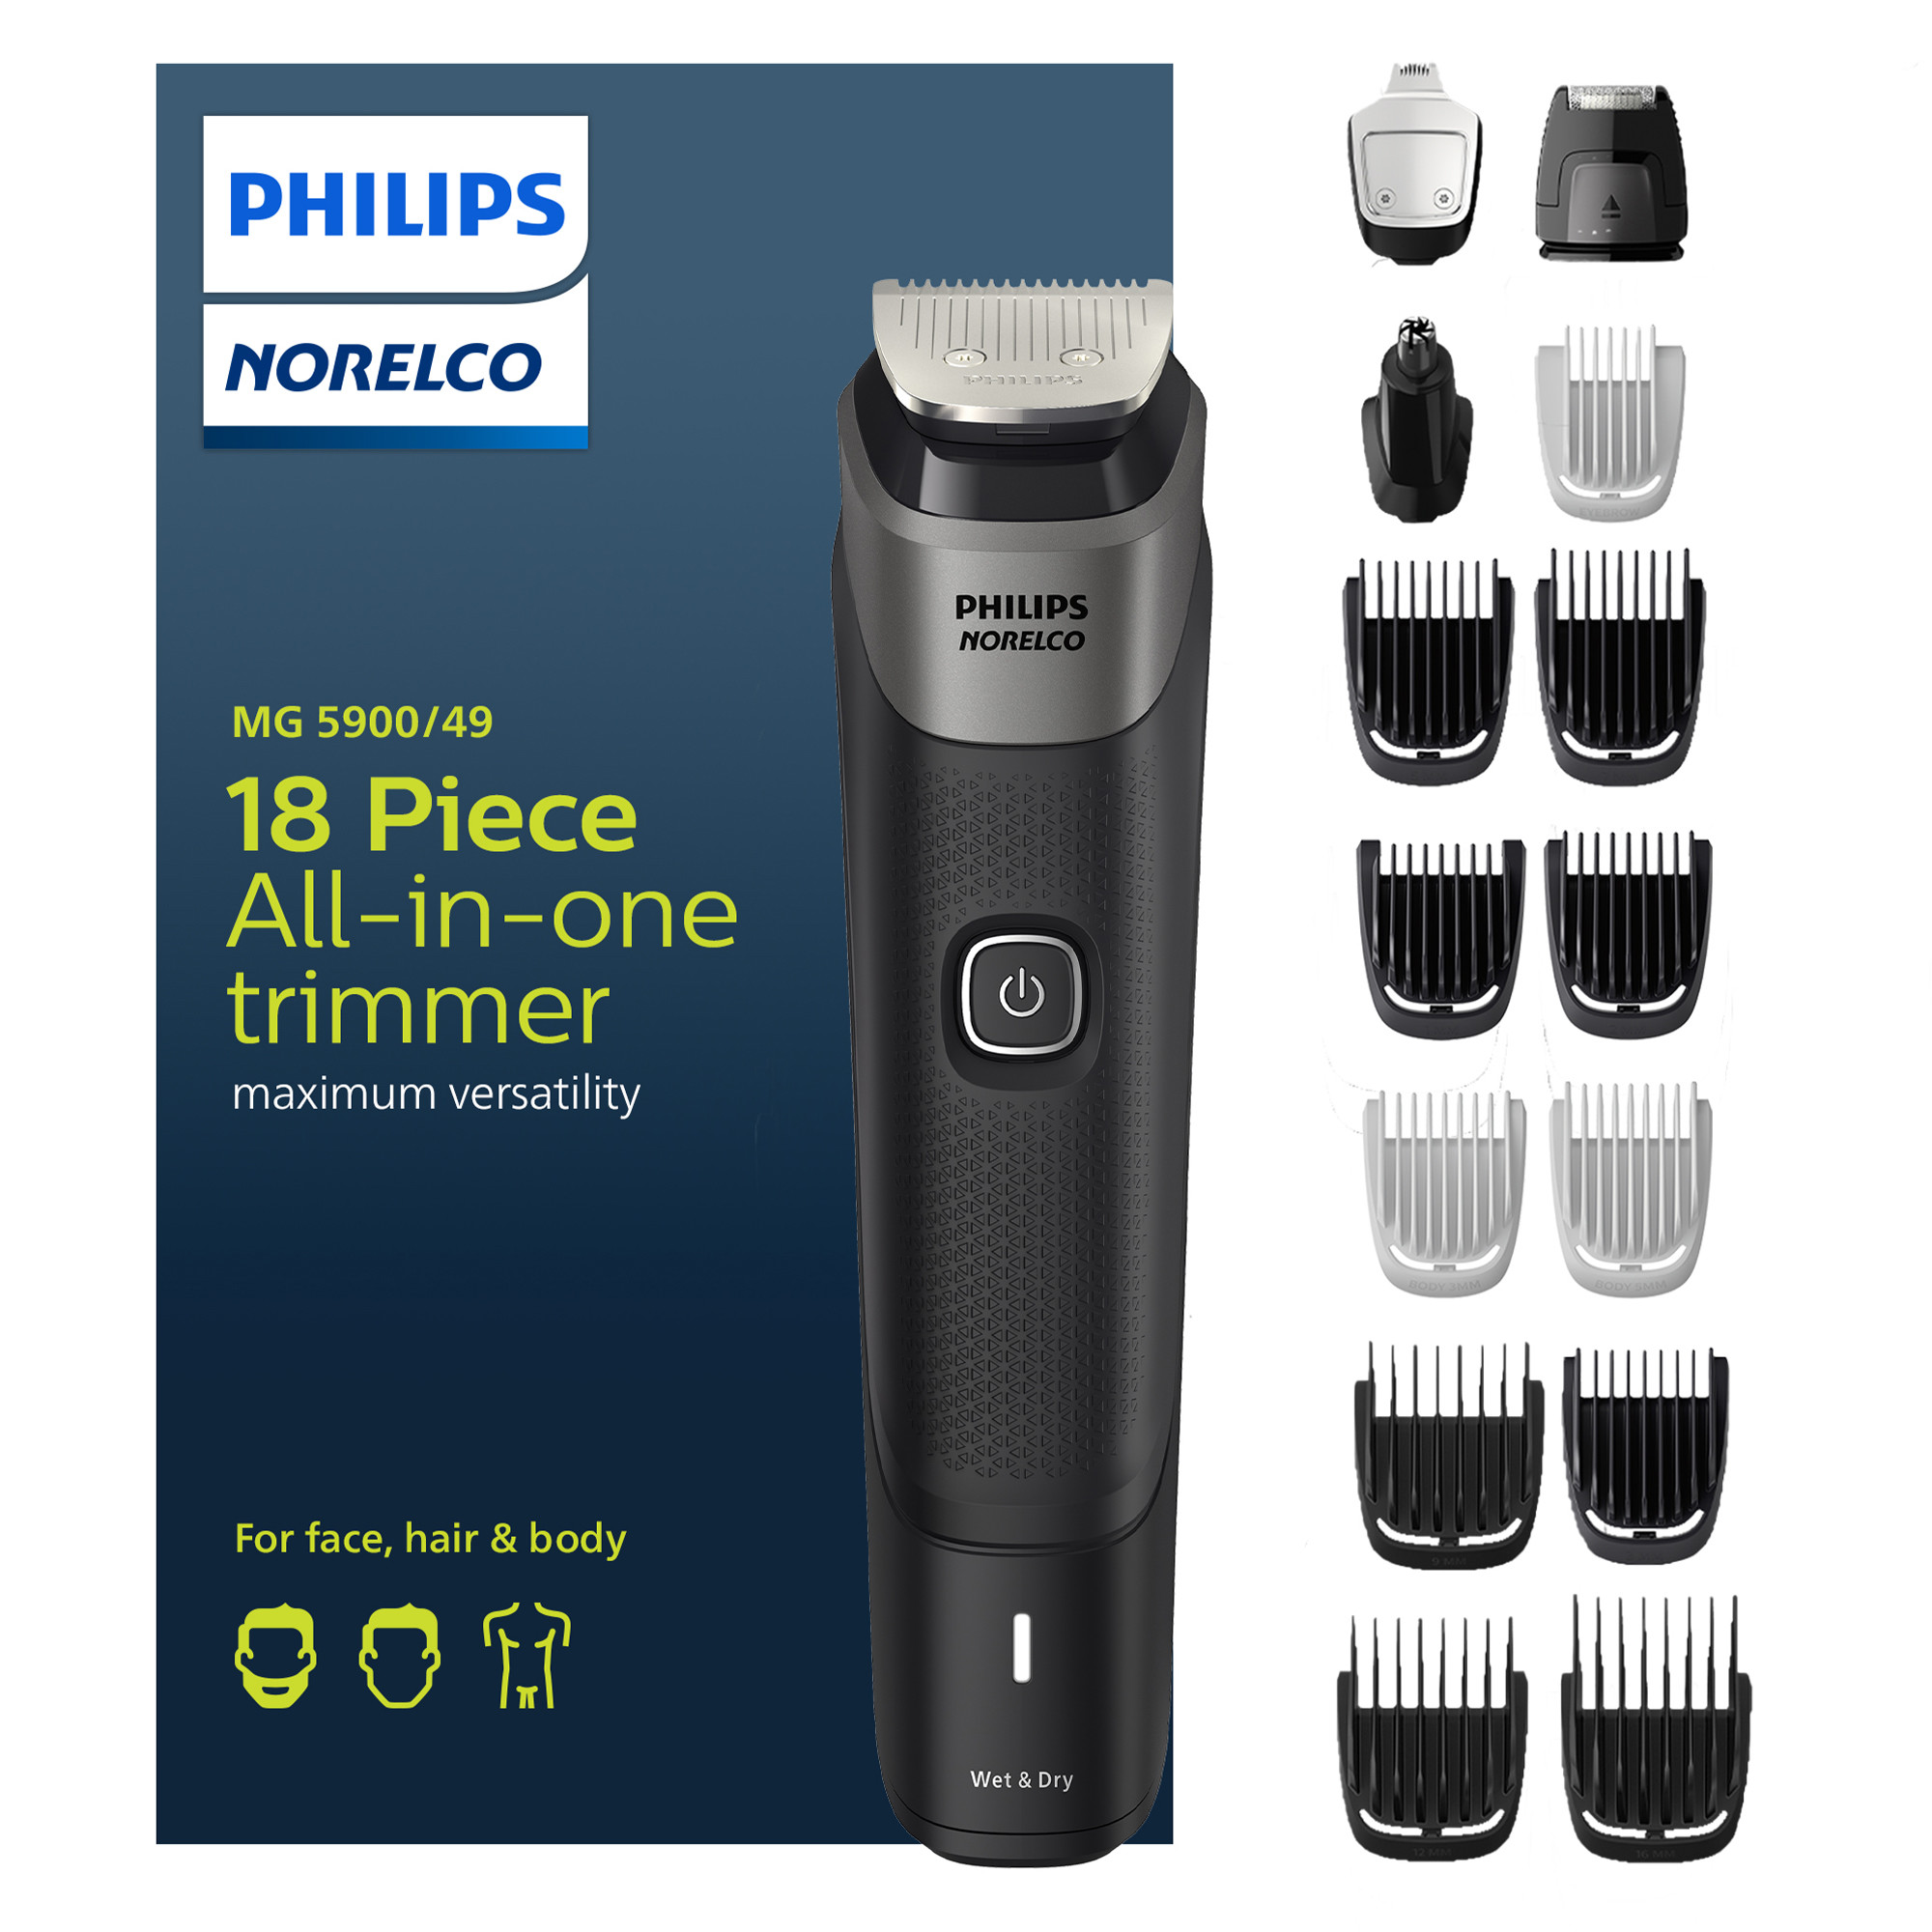 Philips Norelco Multigroom Series 5000 18 Piece, Beard Face, Hair, Body and Intimate Hair Trimmer For Men - No Blade Oil MG5900/49 - image 1 of 25